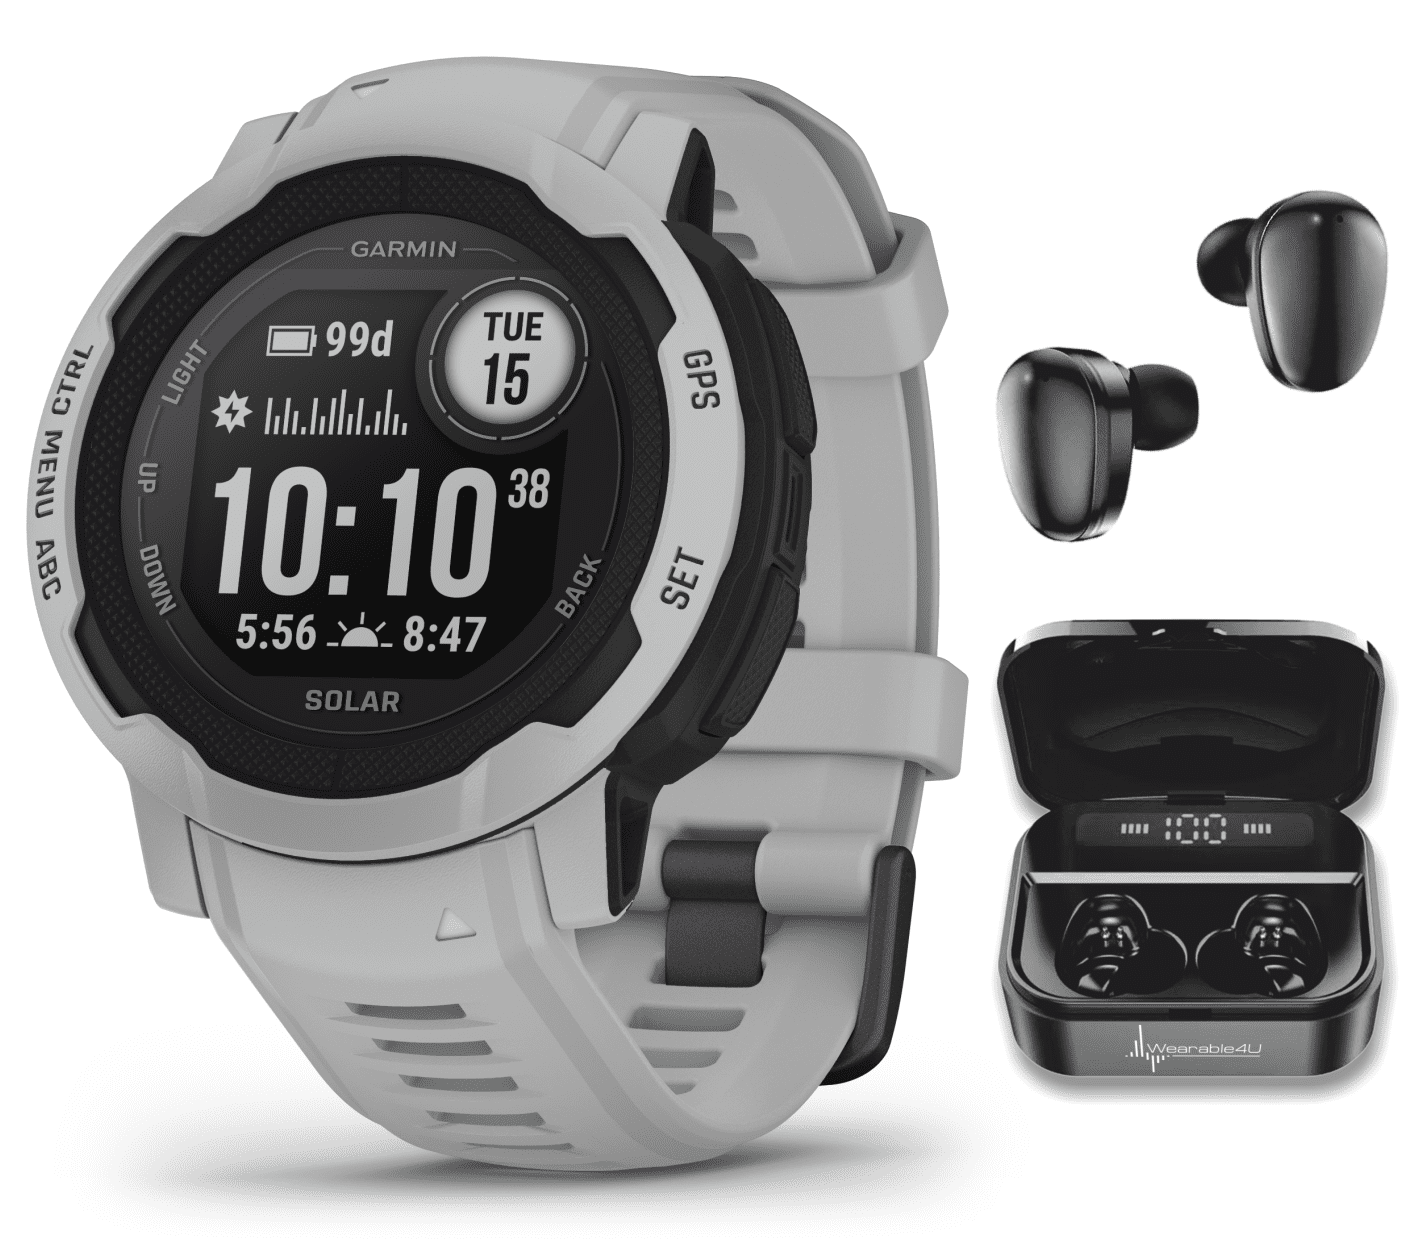 Garmin Instinct 2S Solar, Smaller-Sized GPS Outdoor Watch, Solar Charging  Capabilities, Multi-GNSS Support, Tracback Routing, Graphite, 40 MM